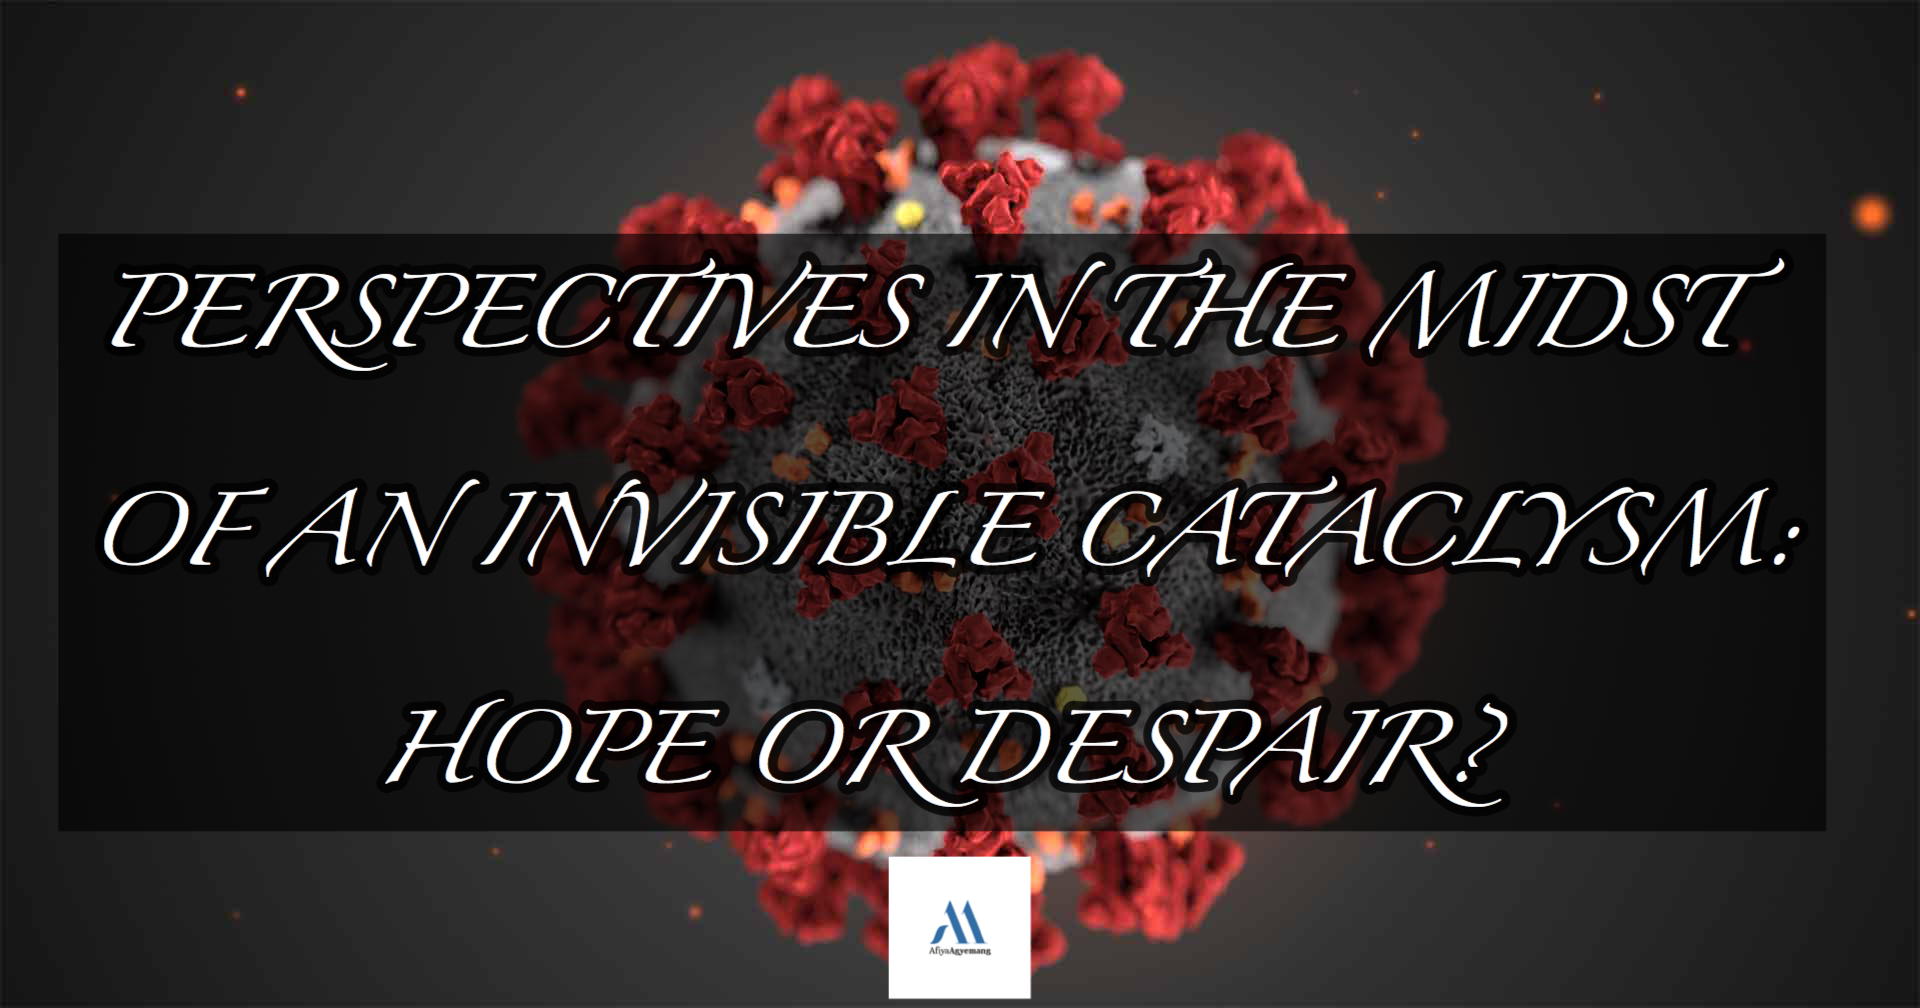 You are currently viewing PERSPECTIVES IN THE MIDST OF AN INVISIBLE CATACLYSM: HOPE OR DESPAIR? (FEATURED POST)